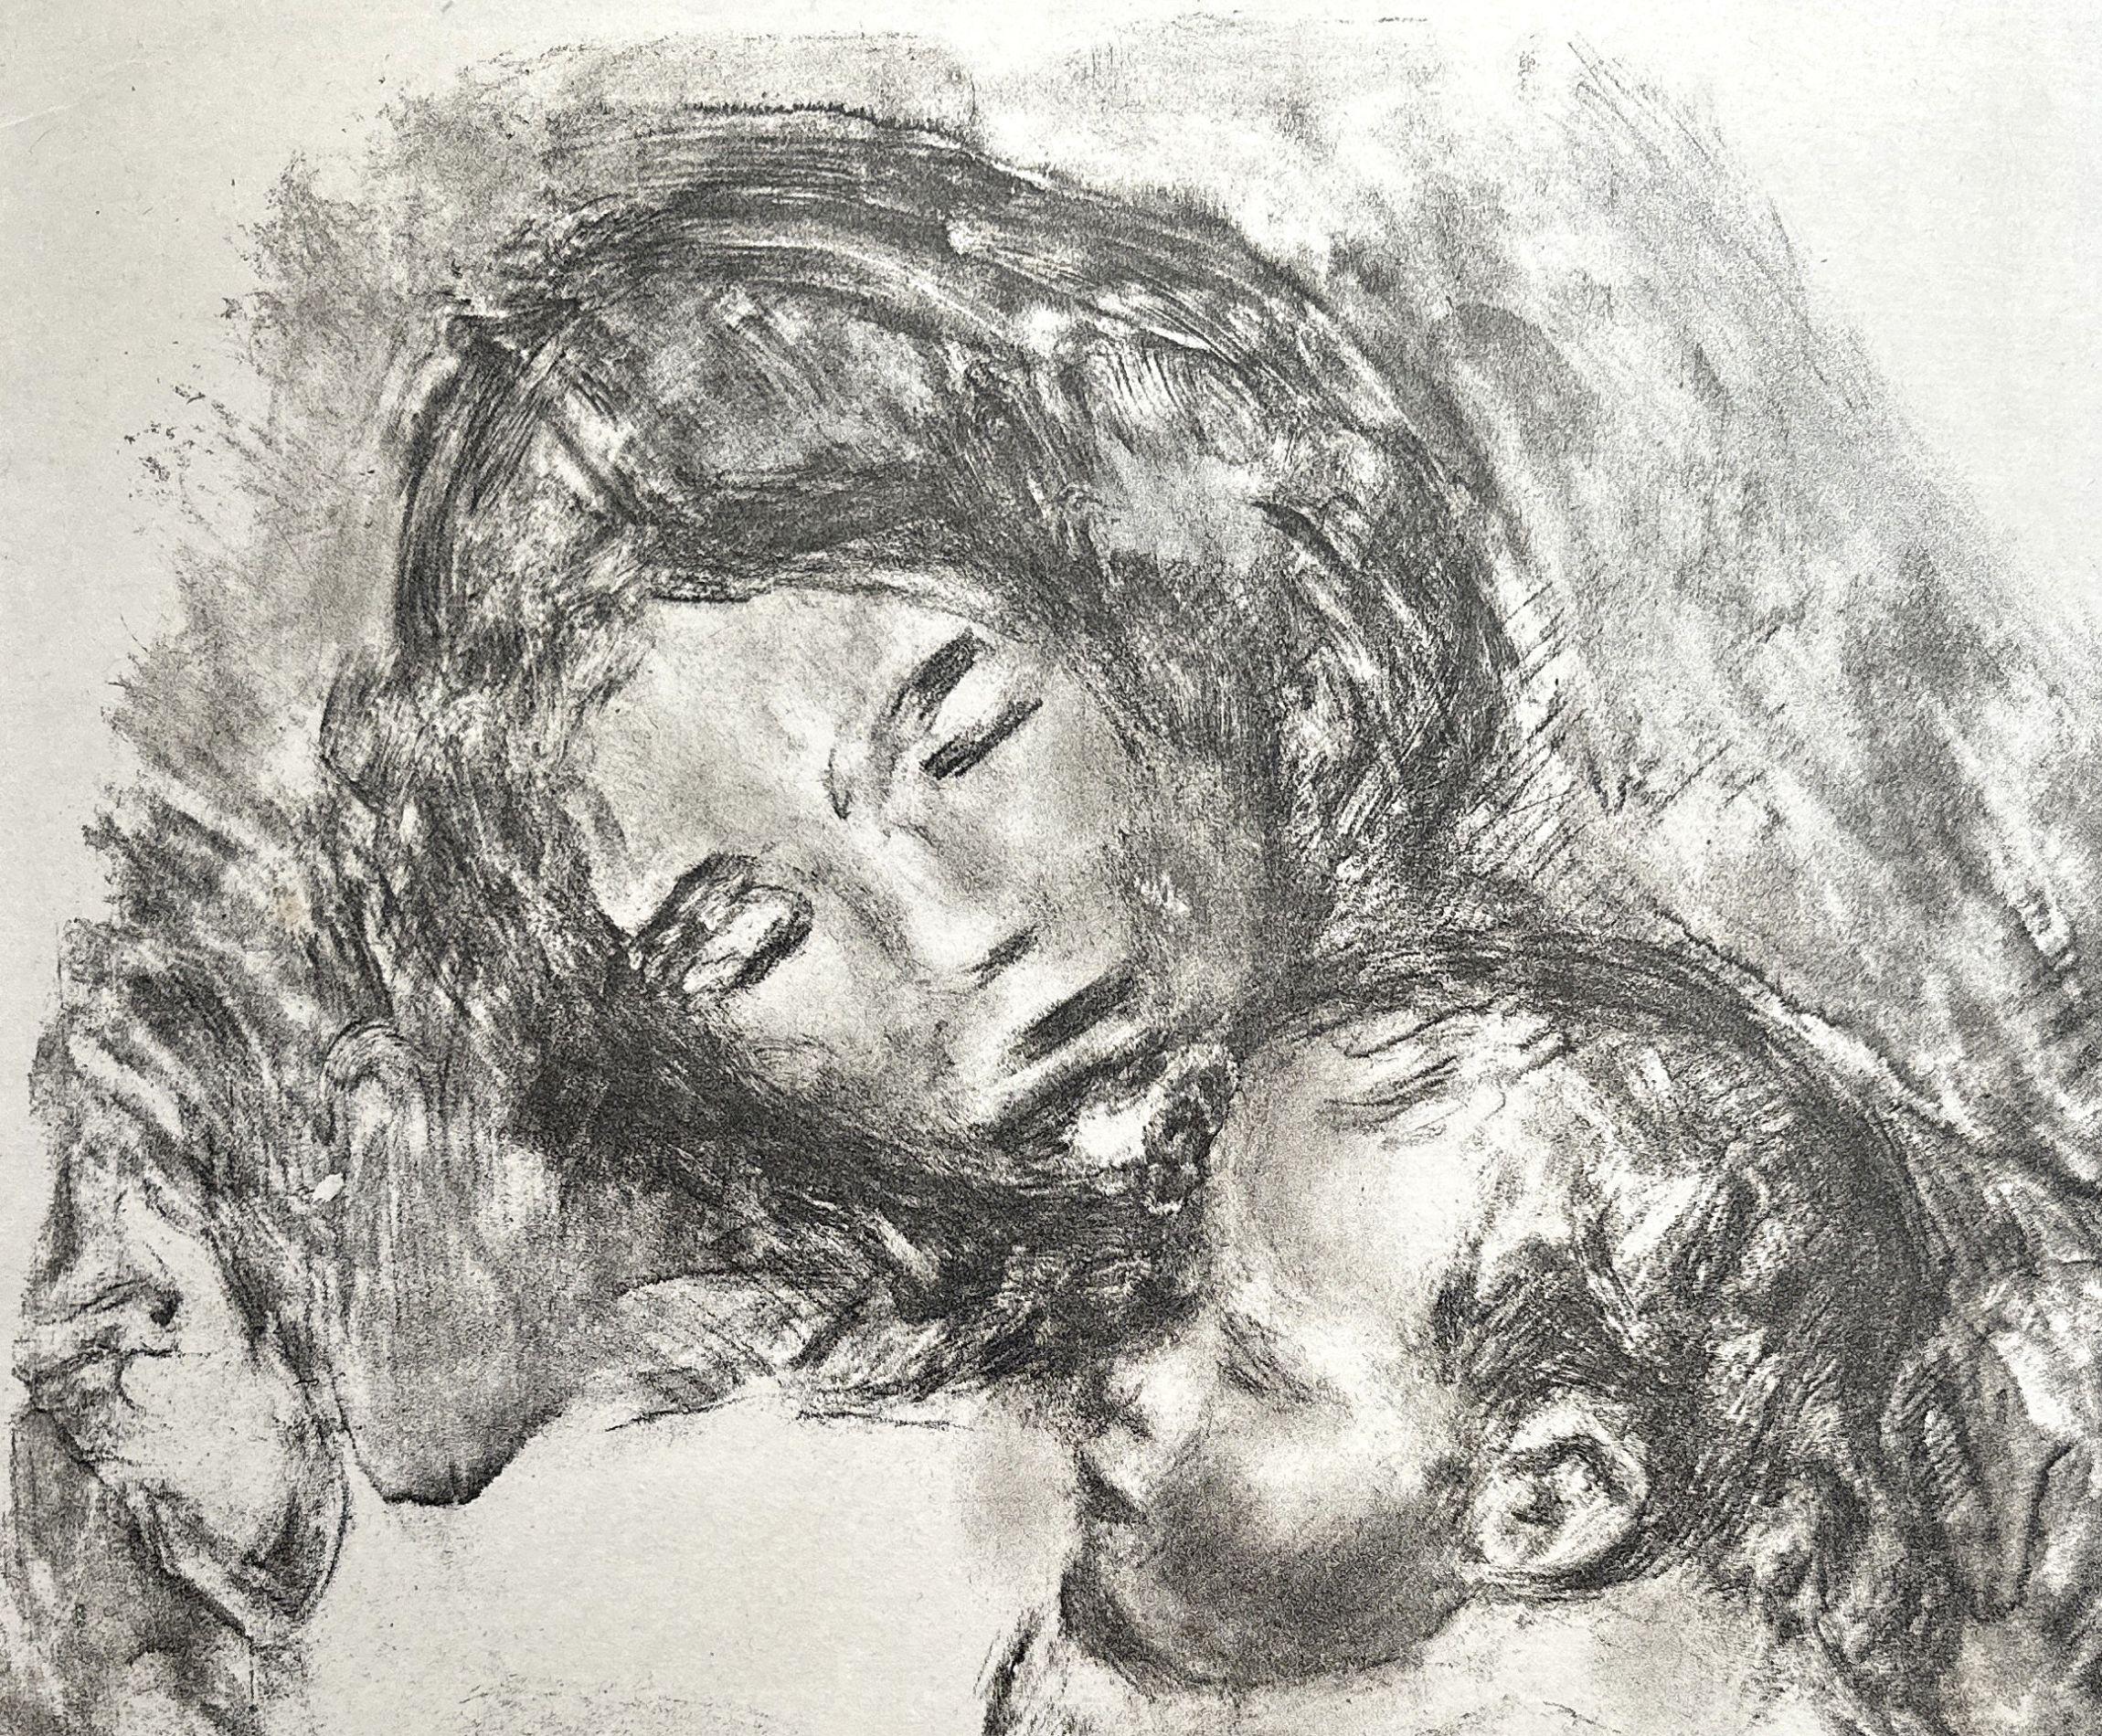 Pierre Auguste Renoir (1841-1919)
Maternity, 1910

Original lithograph
Signed in the plate
Edition of 100 copies
On China paper size c. 60 x 49 cm (c. 23.6 x 19.3 in)
In a beautiful golden wood frame size 88 x 75 cm (c. 34.6 x 29.5 in)

REFERENCE :